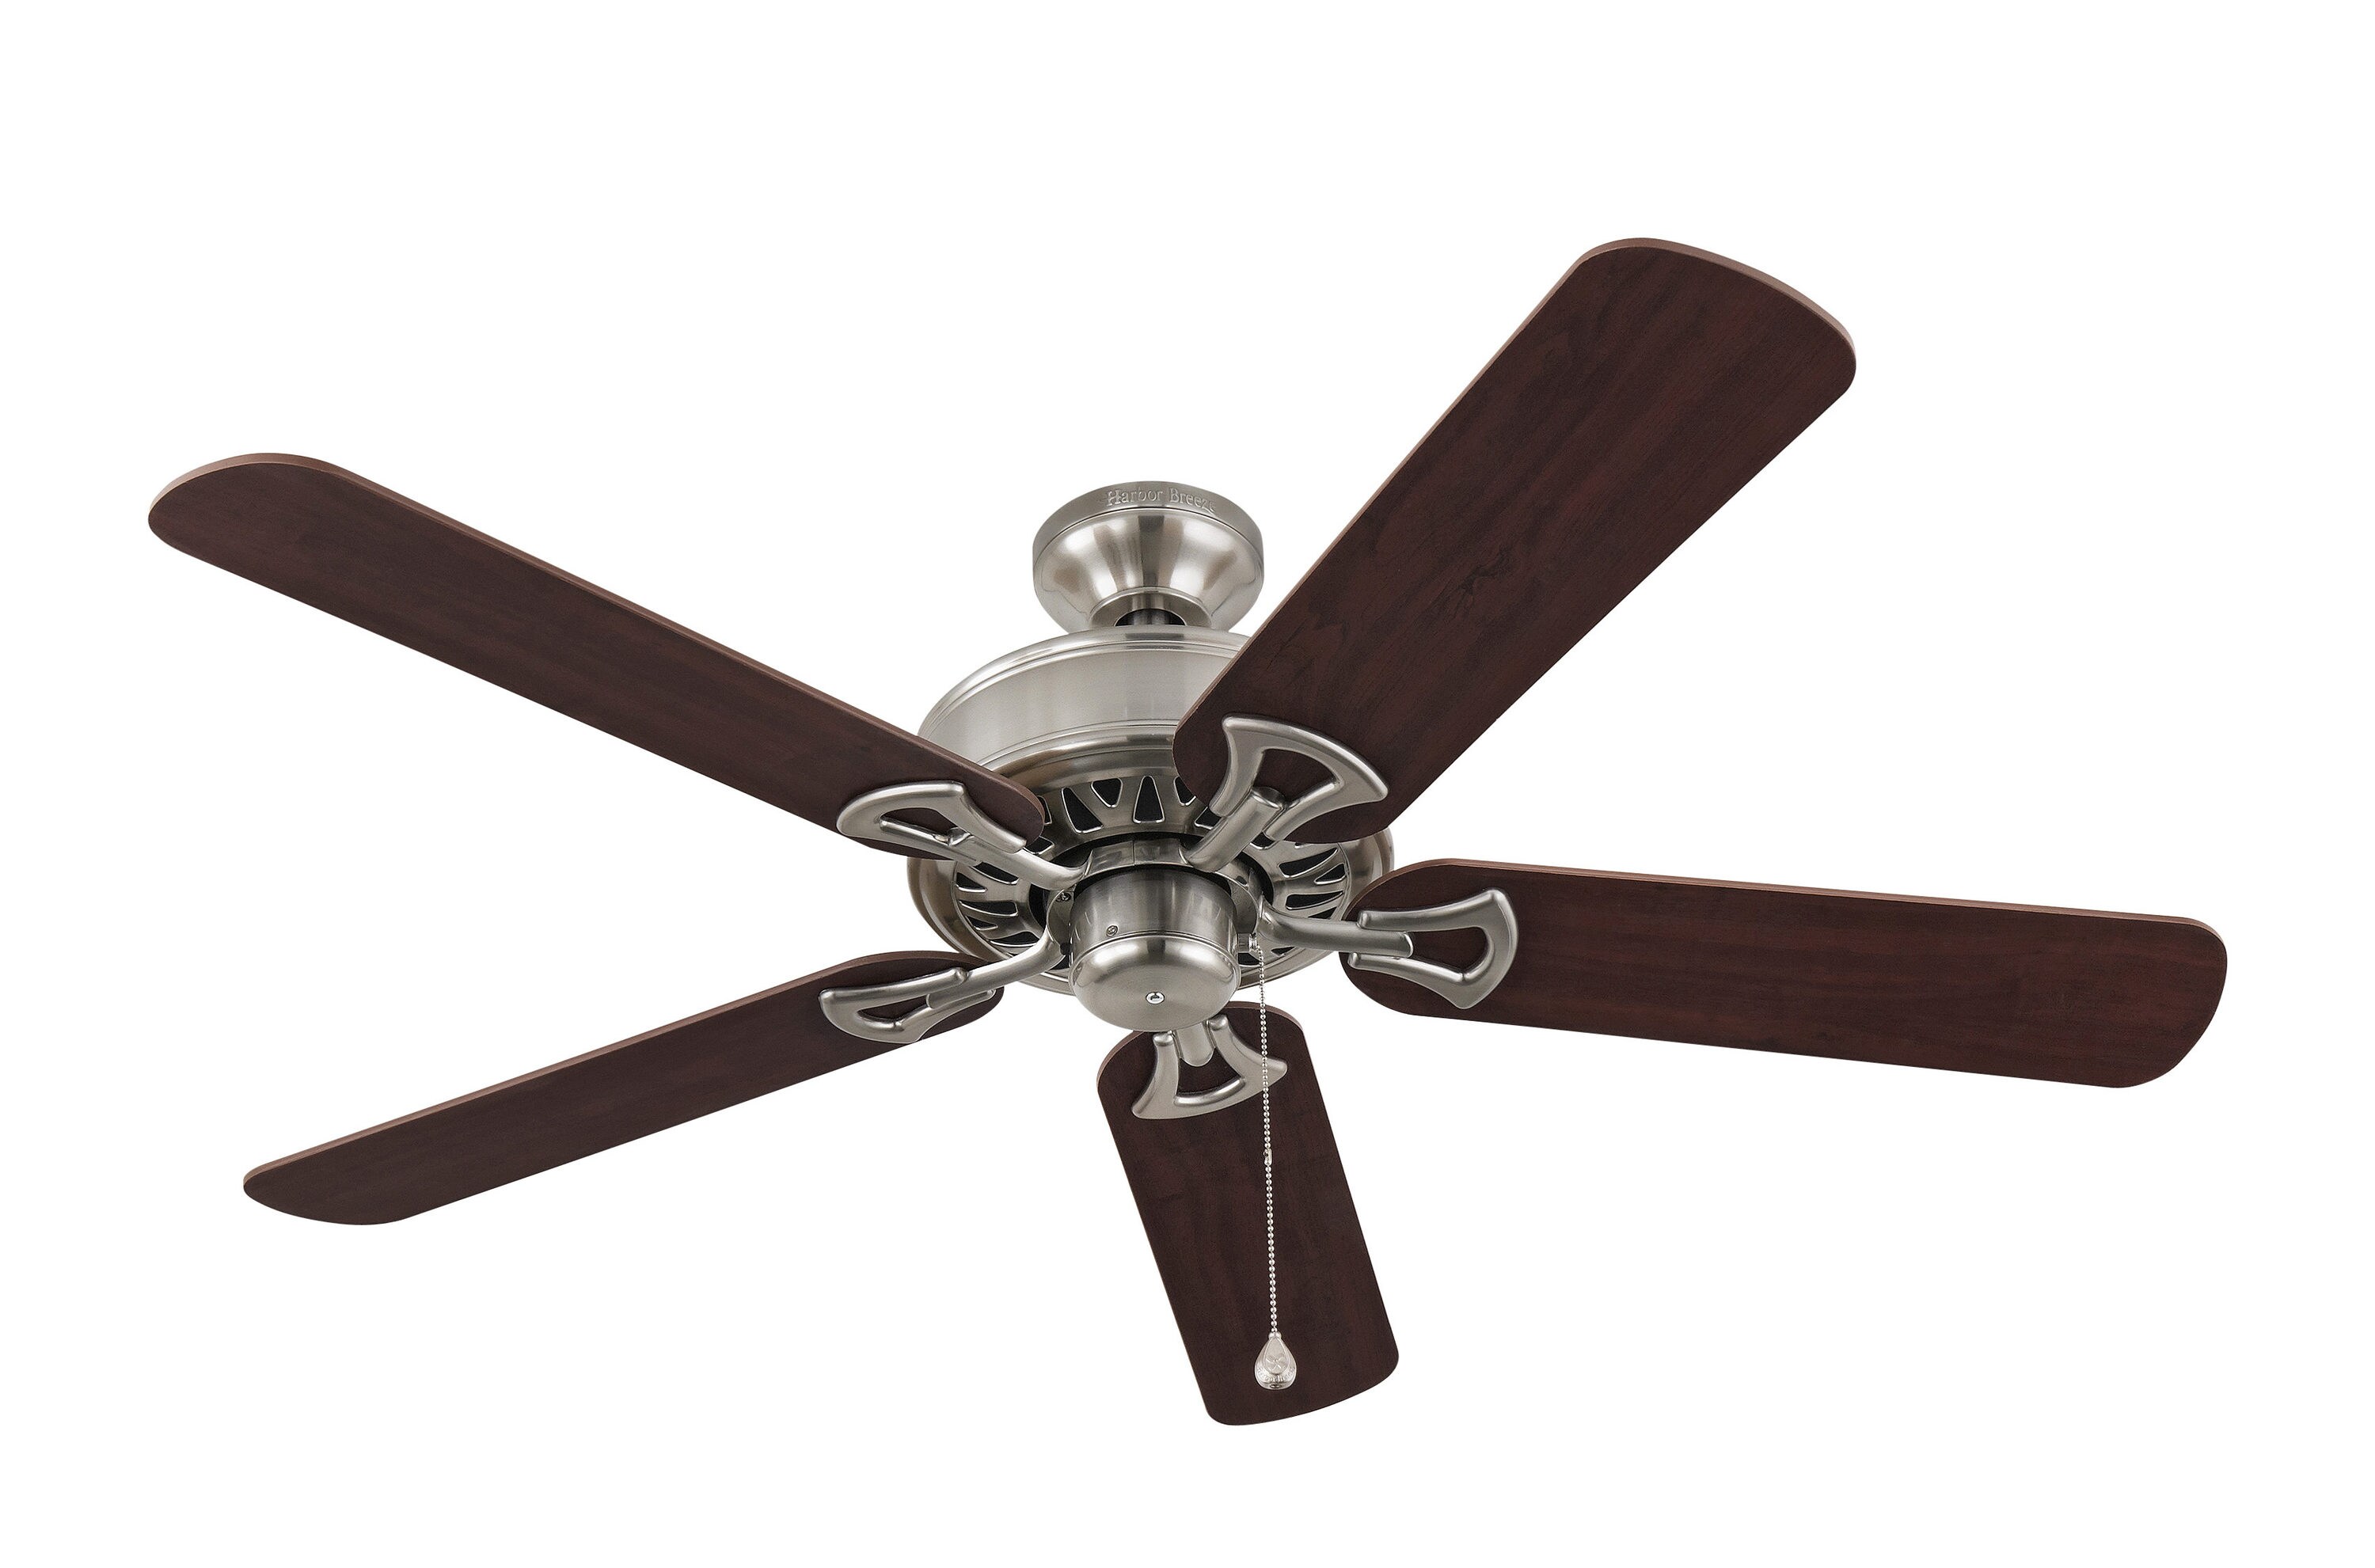 Harbor Breeze Classic 52" Ceiling Fan #0080297 Brushed Nickel for sale online 